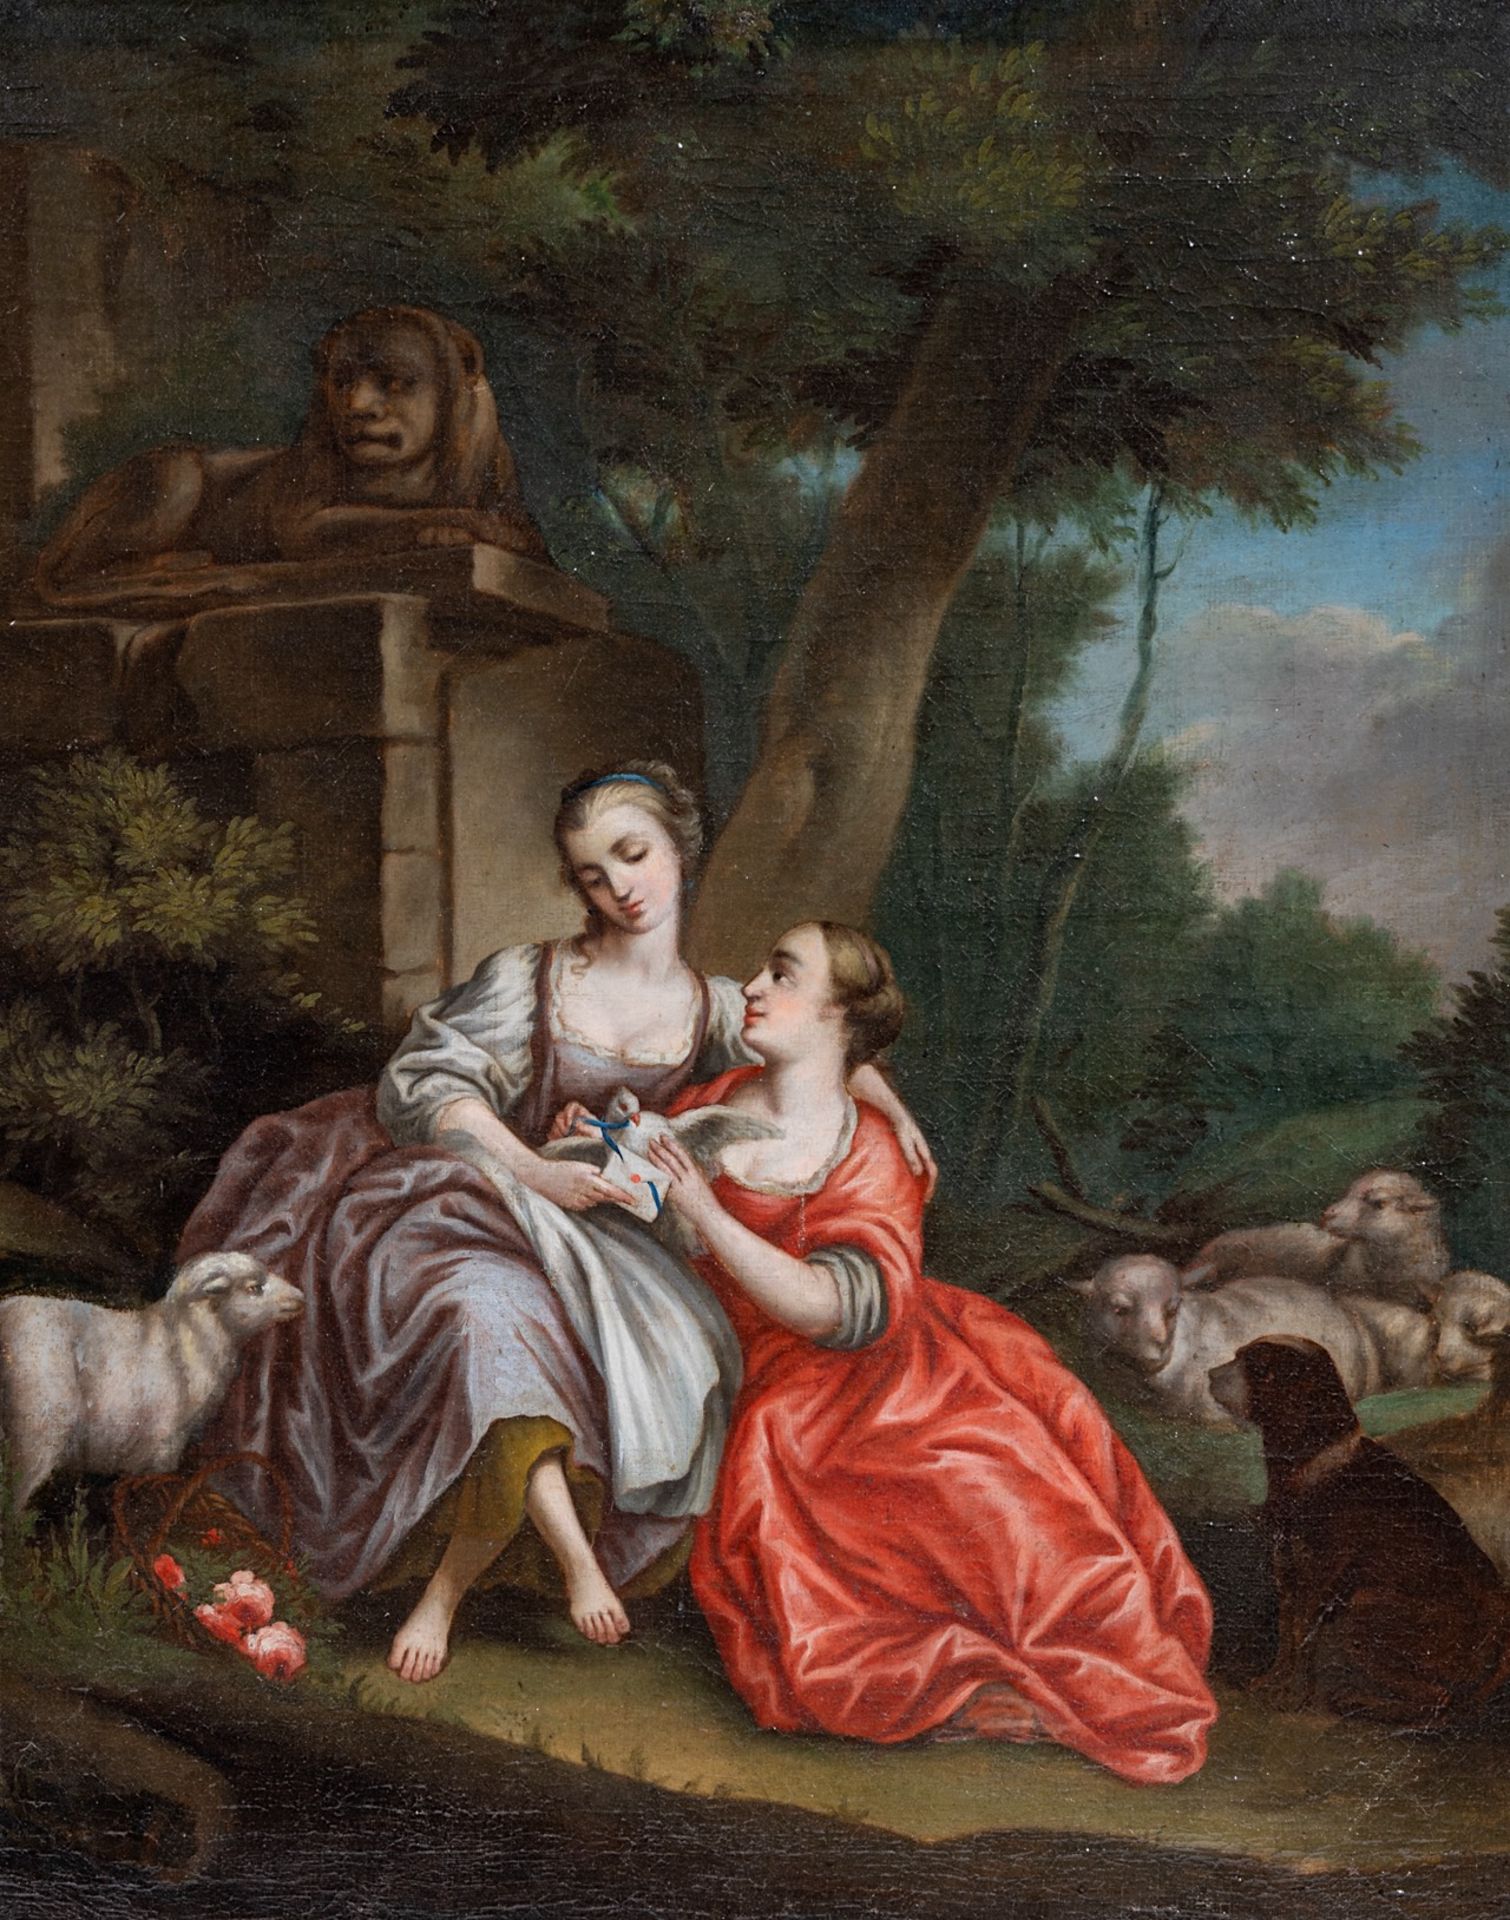 Two gallant ladies reading a love letter in a garden setting with sheep, 18th/19thC, French School,